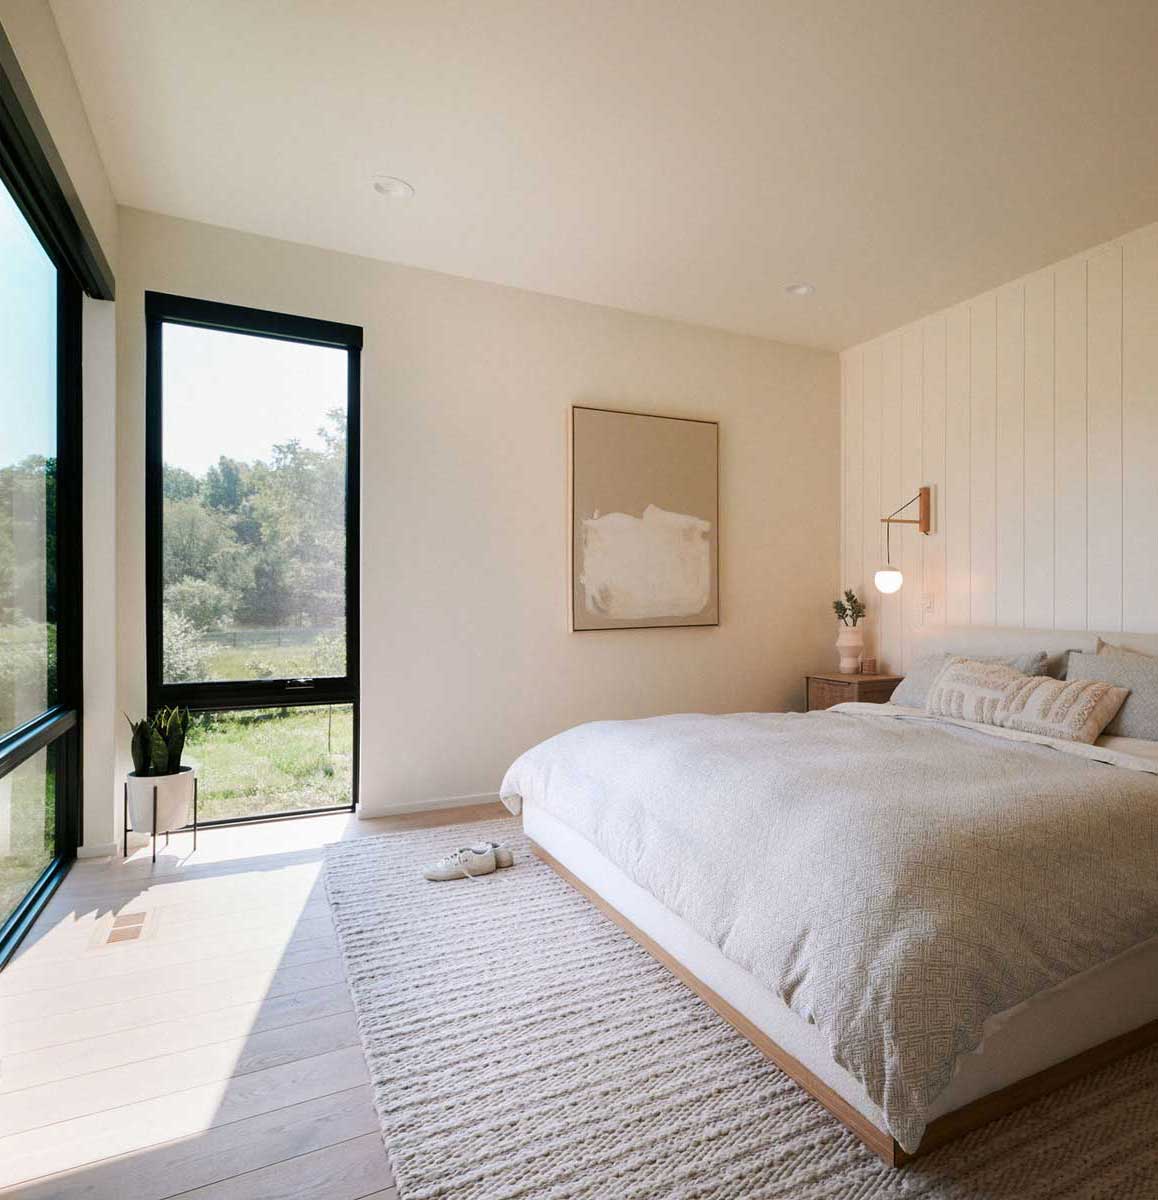 A minimalist bedroom with lots of light cream colors features lots of natural light from Marvin Essential Direct Glaze and Casement windows.